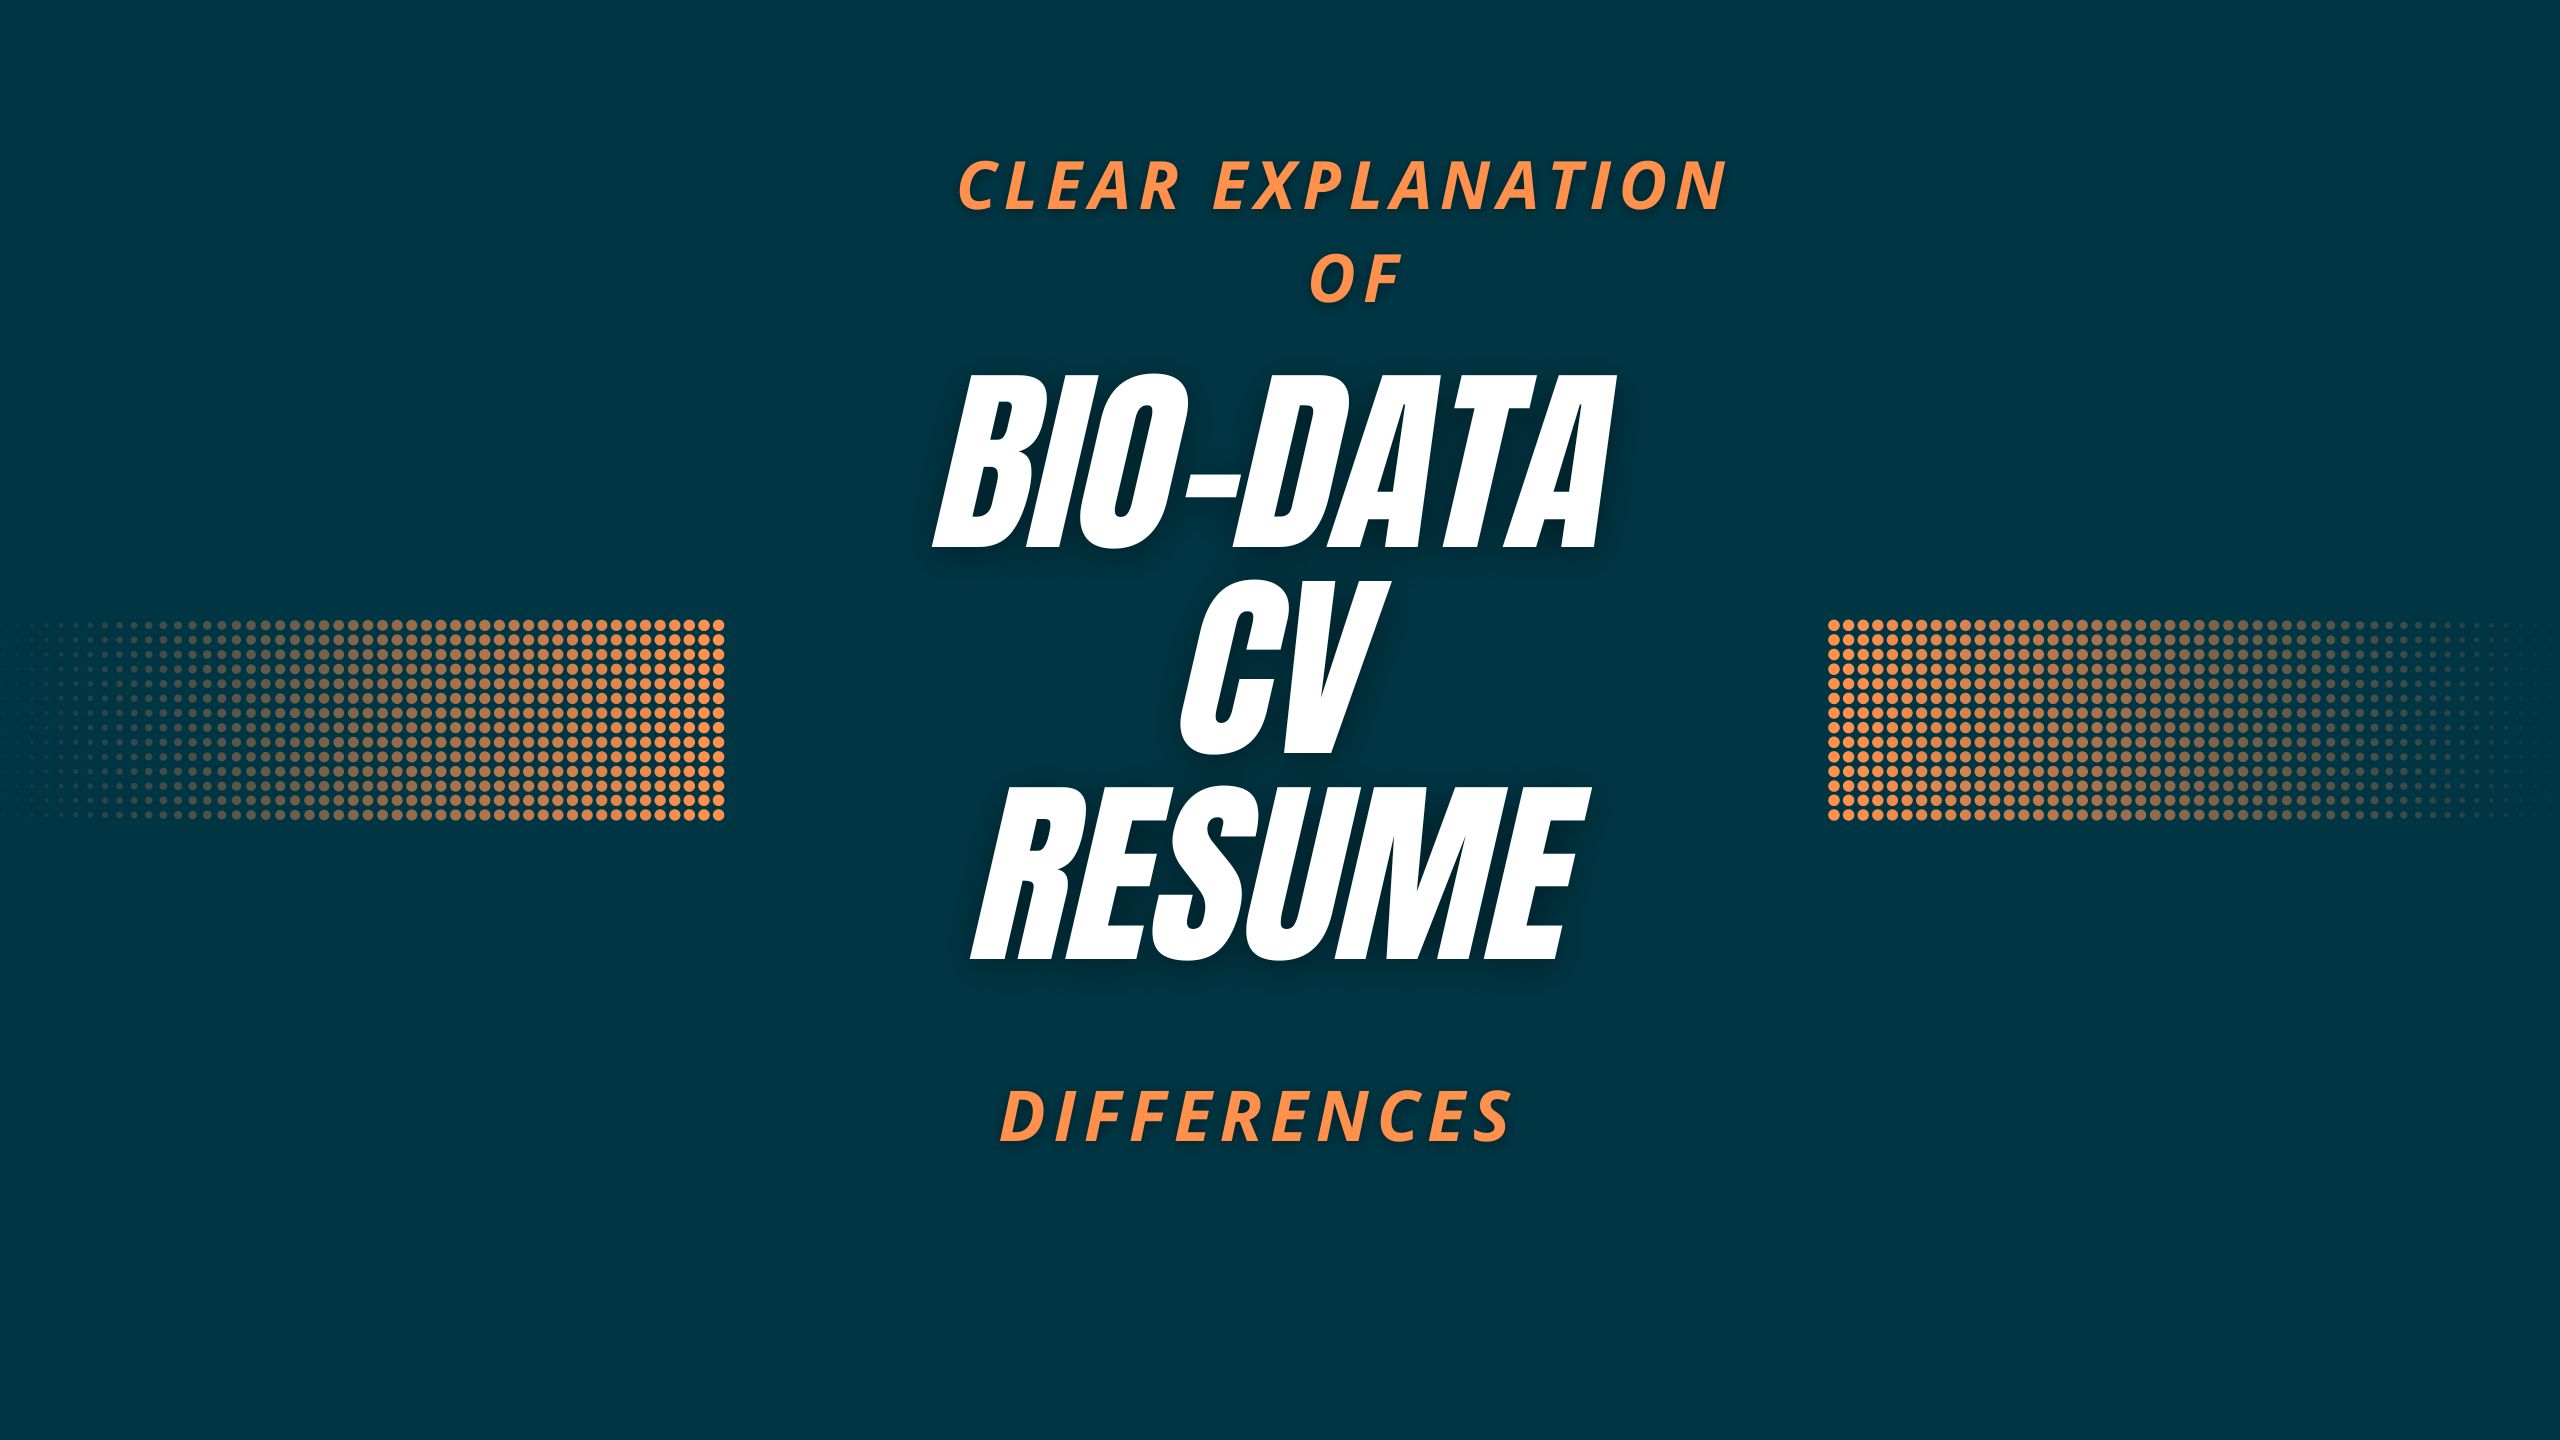 What is the difference between bio-data and CV and resume illustration